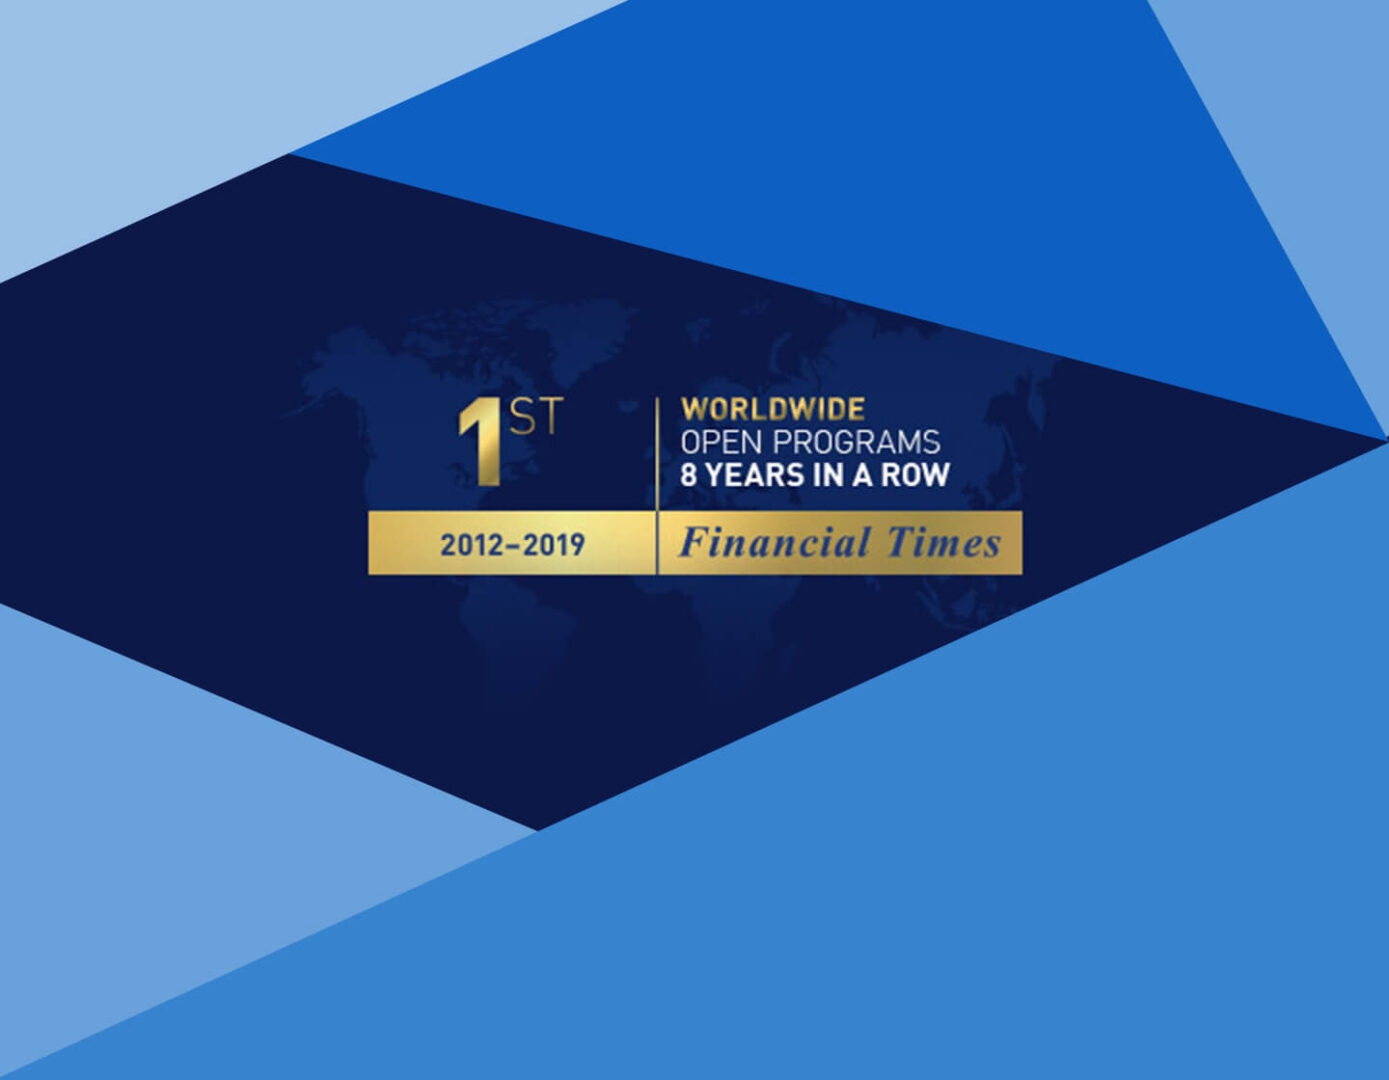 IMD ranked #1 in open programs 8 years in a row (2012-2019) in the Financial Times Executive Education Rankings